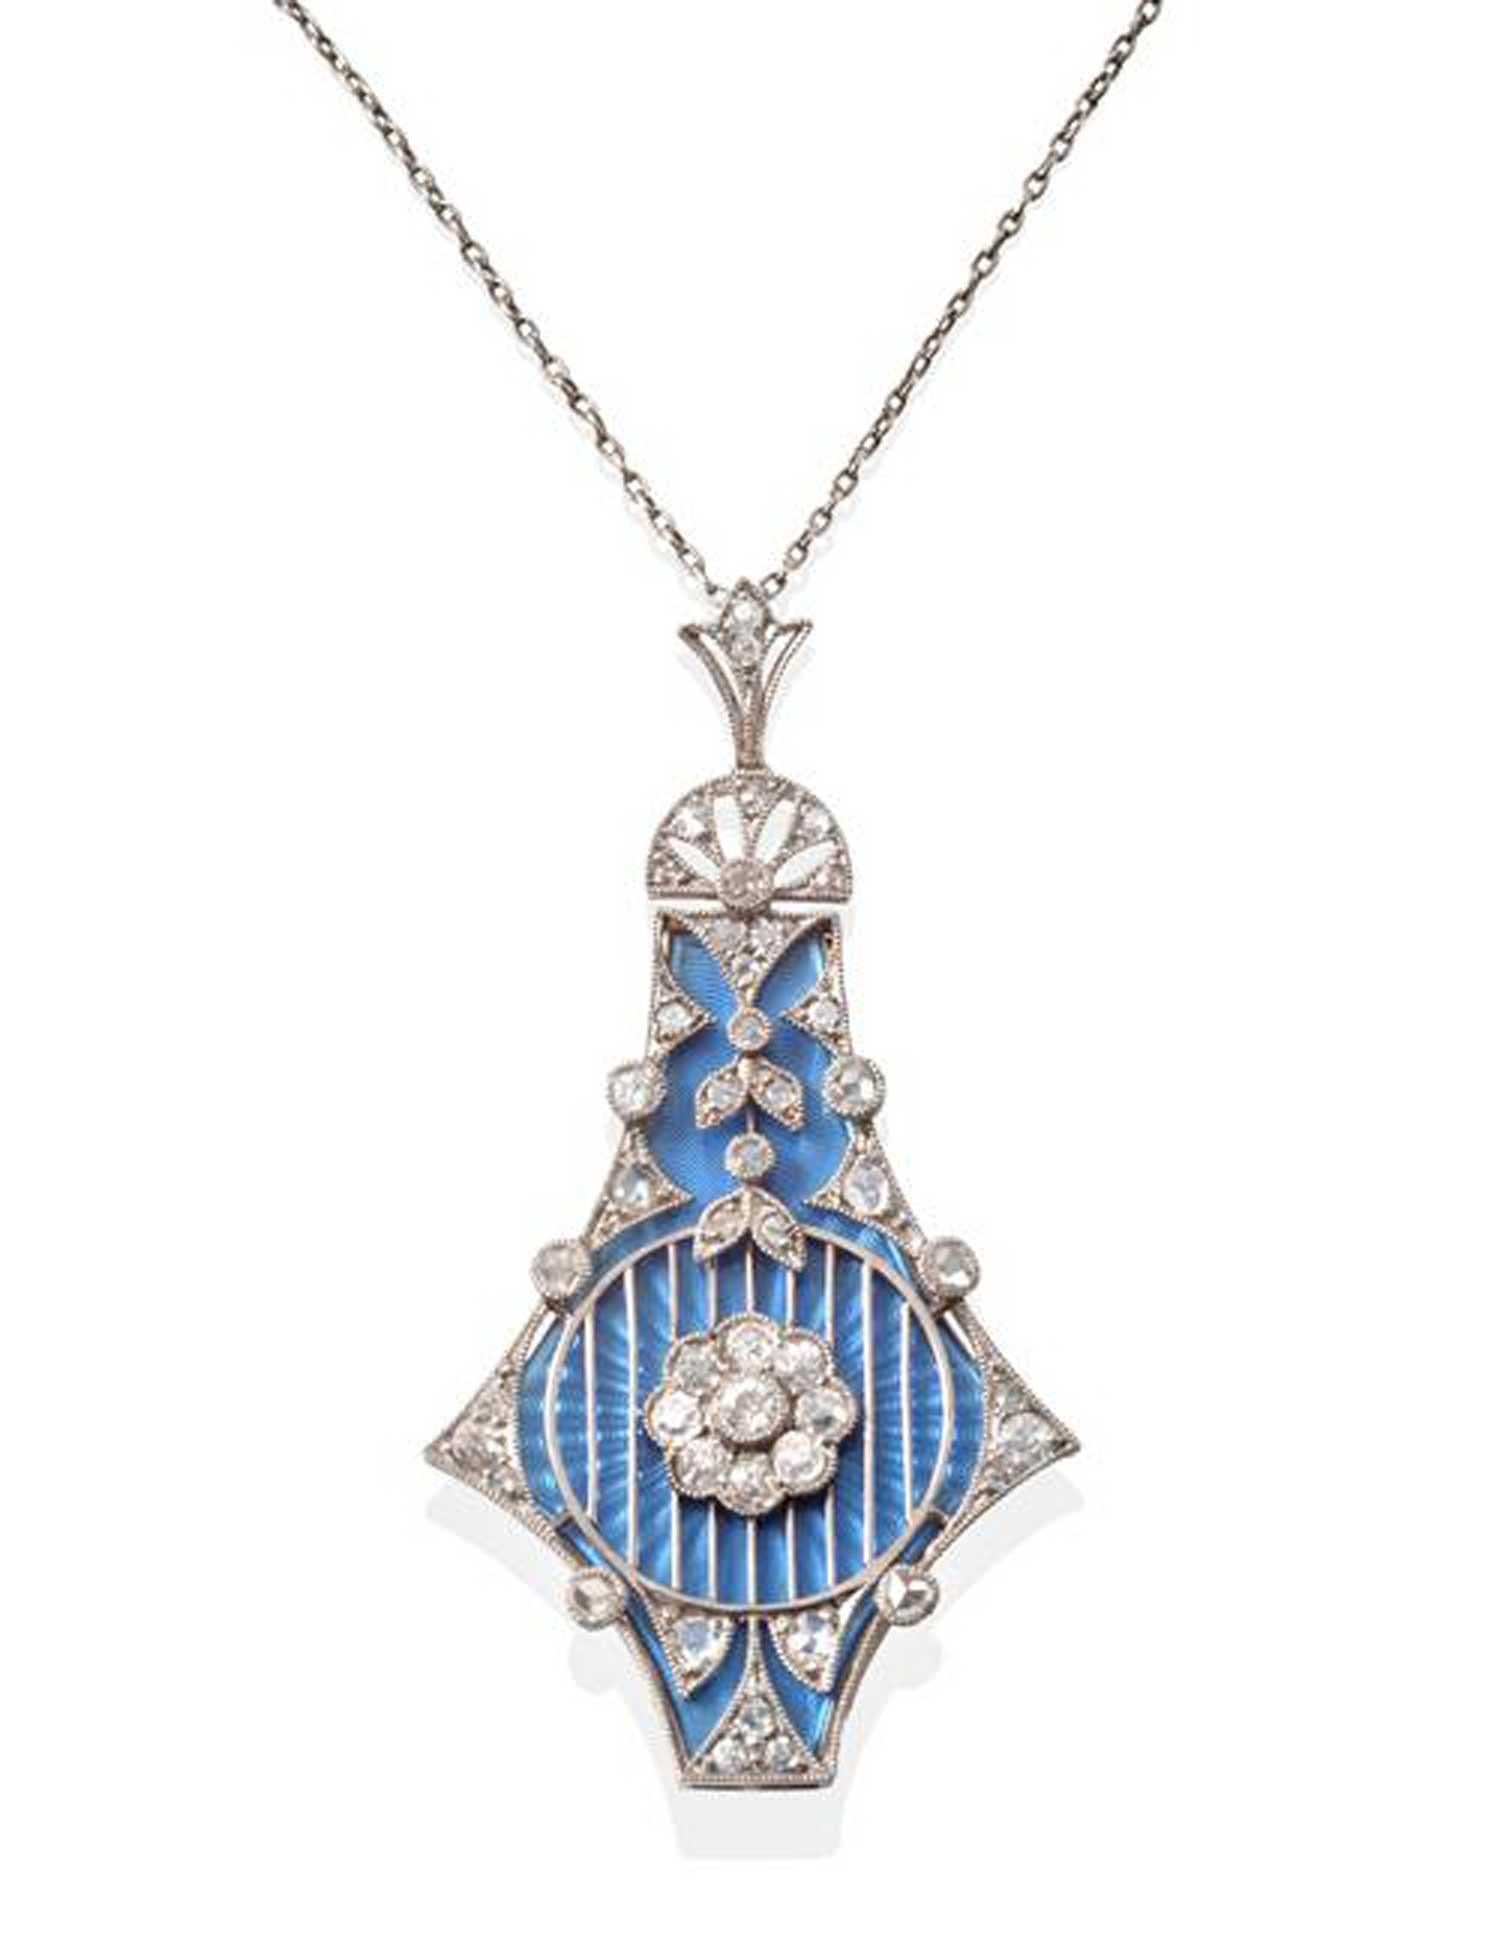 An antique diamond and enamel pendant in the Belle Epoque style with three interchangeable guilloche enamel plaques, one each in pink, pale blue, and mid-blue.  The pendant outline is in the form of an abstract kite-shape pendant measuring 1.96